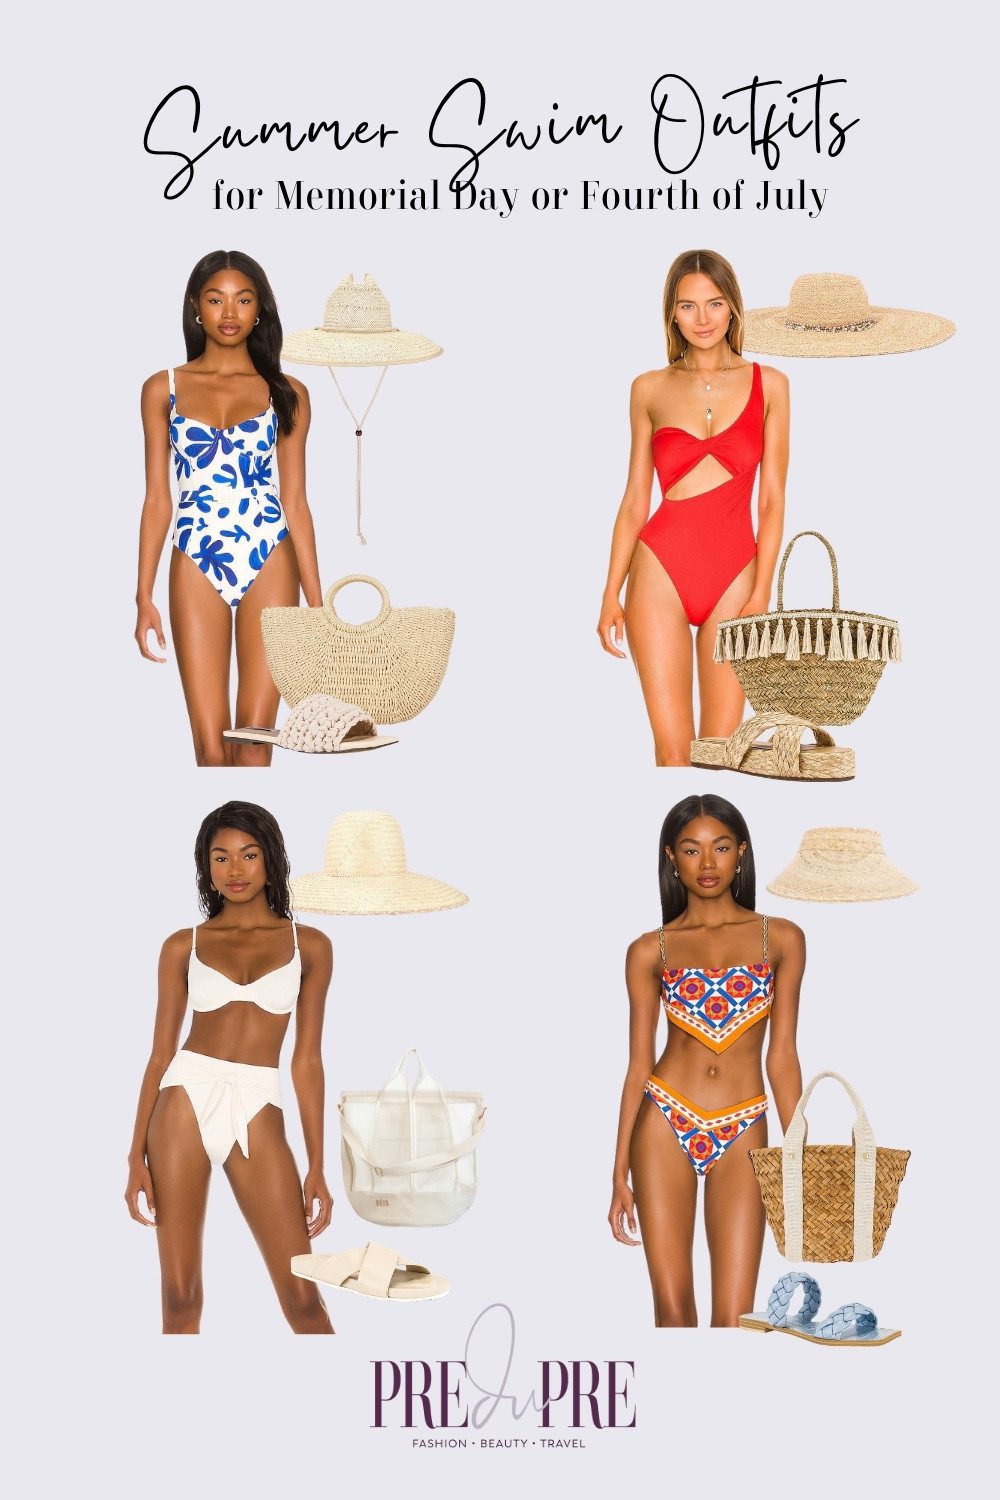 Collage of patriotic pool or beach outfit ideas for Memorial Day and/or Independence Day on Fourth of July